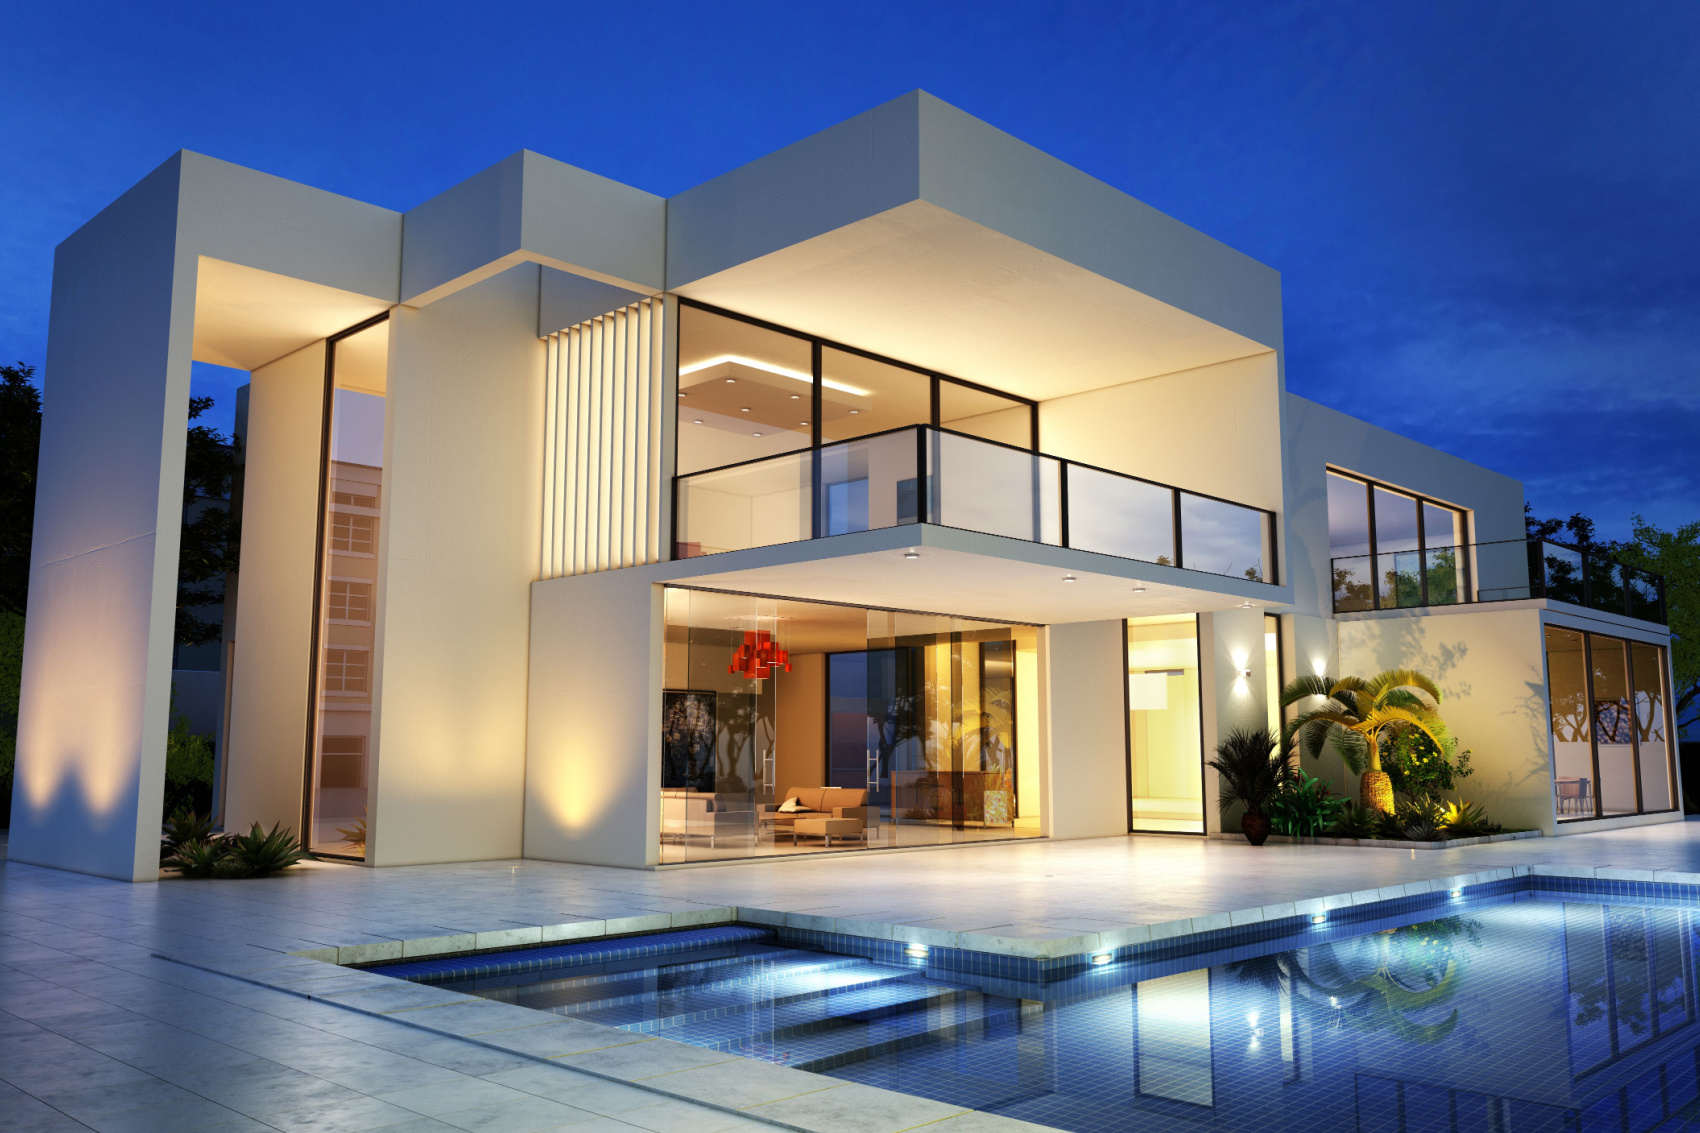 Image a the evening of a luxury house at with a swimming pool.